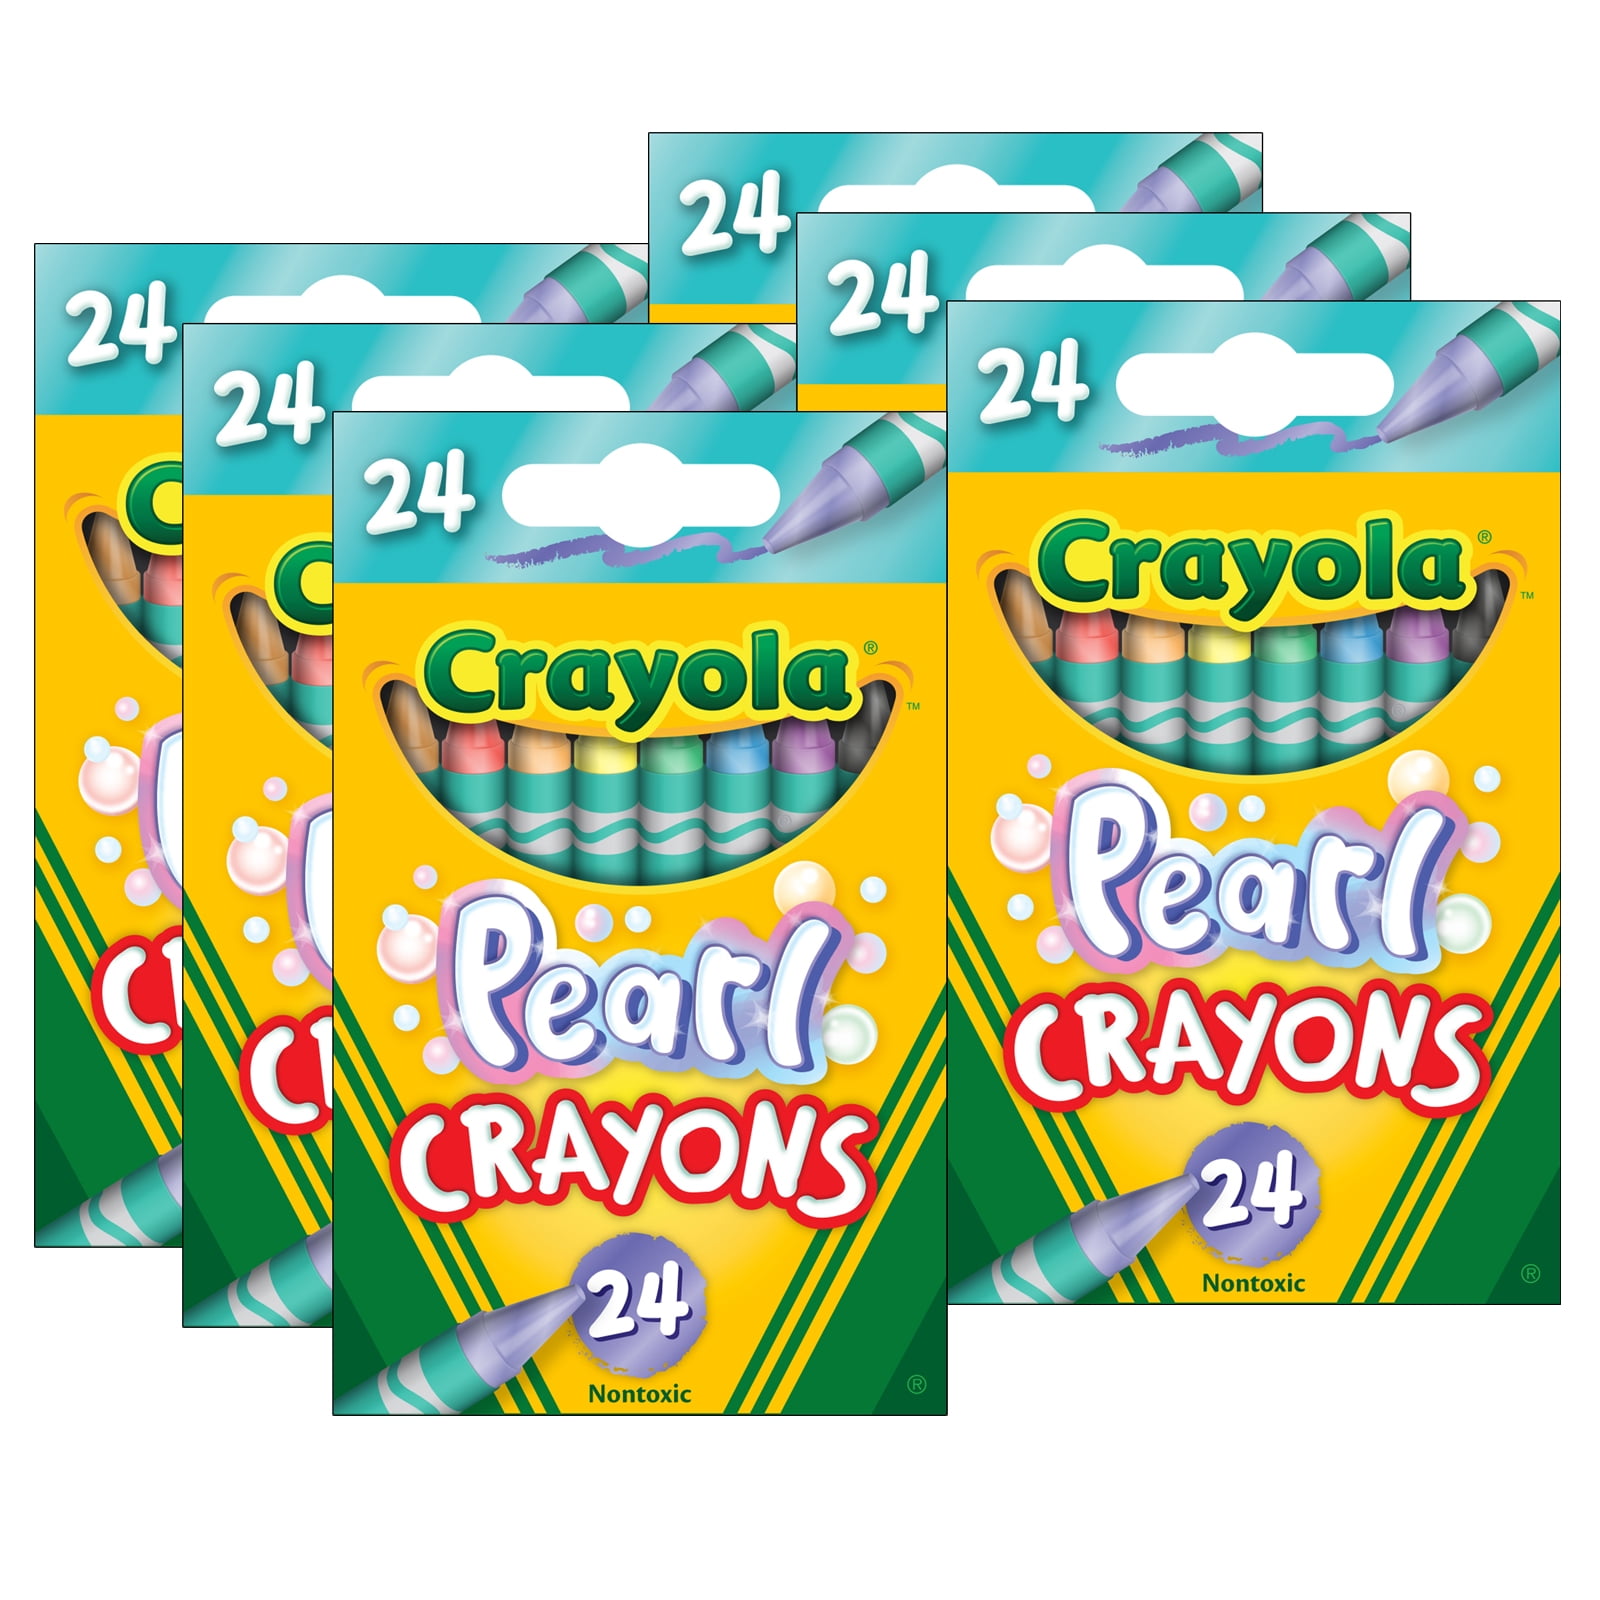  Crayola Pearl Crayons, Pearlescent Colors, 24 Count, Coloring  Supplies, Gift for Kids, Ages 3, 4, 5, 6 : Toys & Games